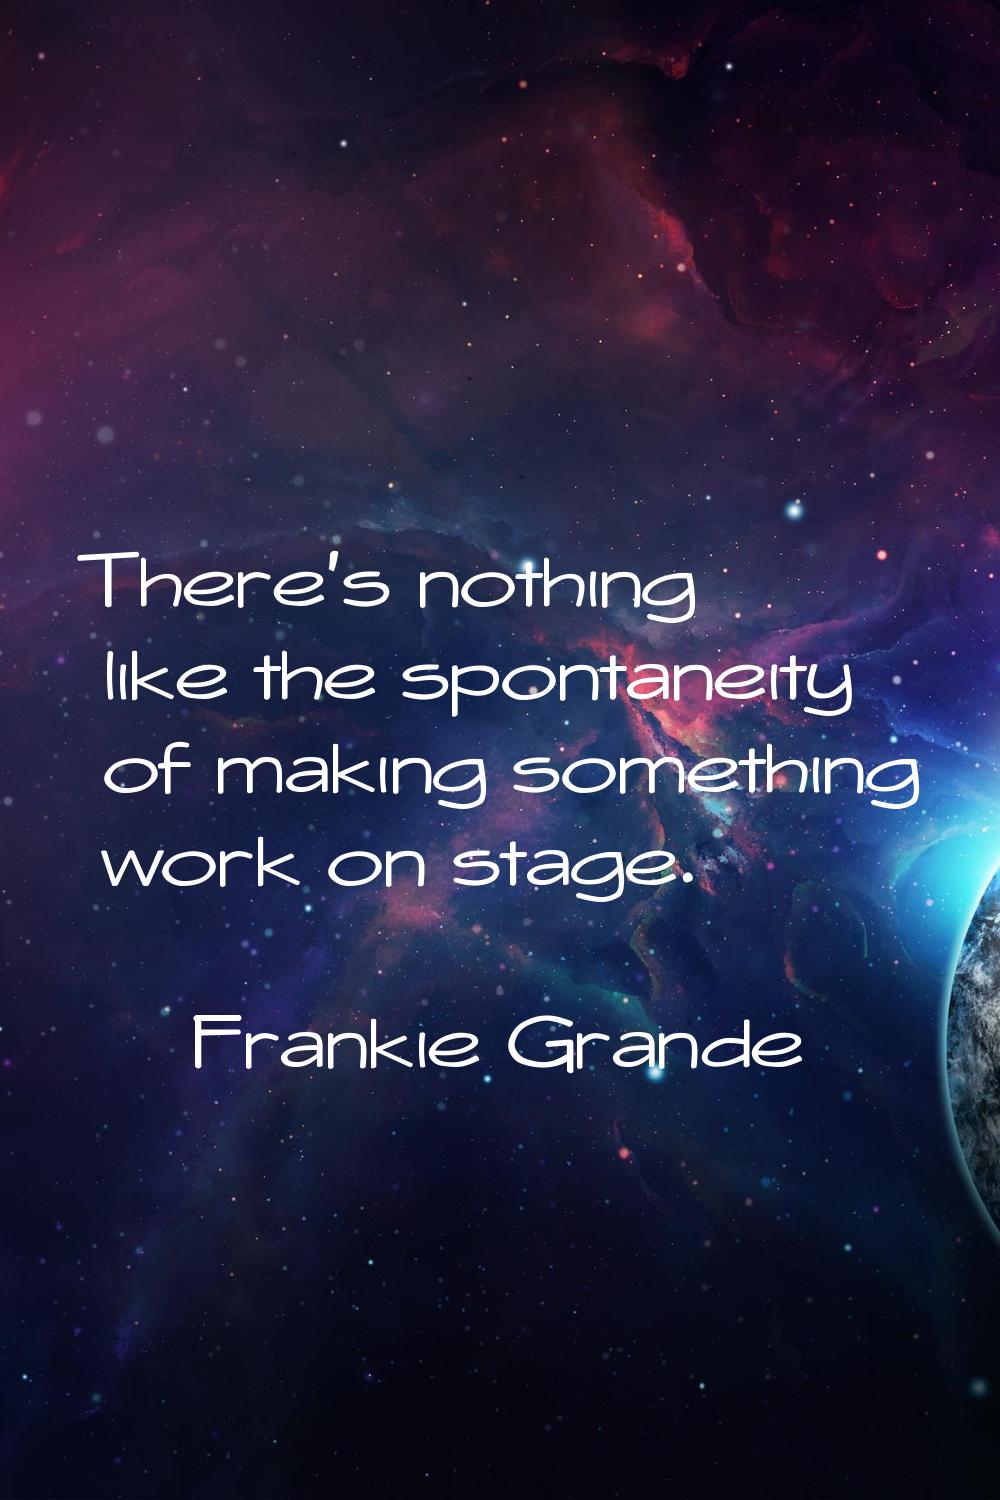 There's nothing like the spontaneity of making something work on stage.